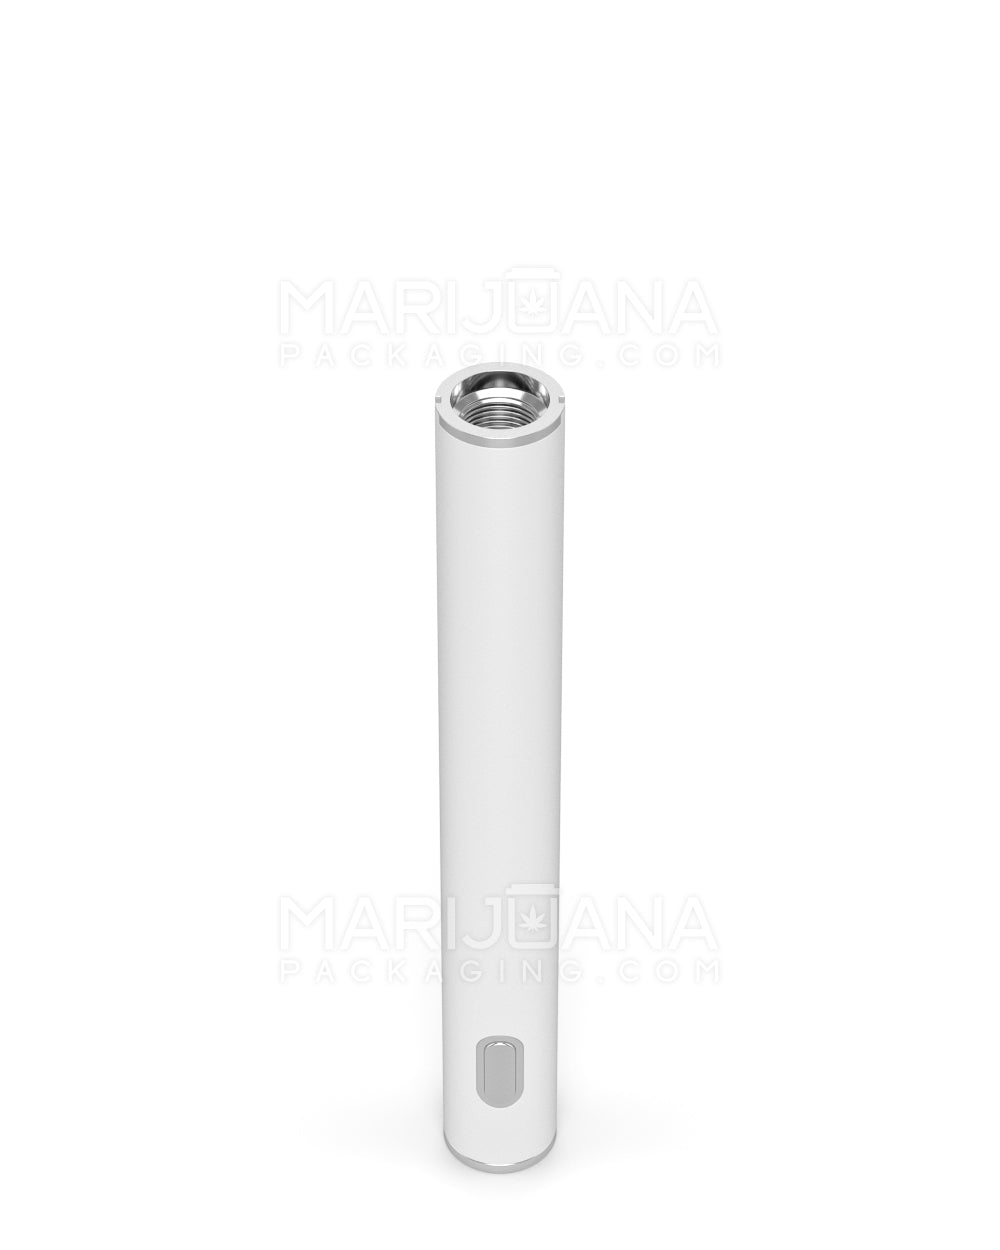 RAE | Instant Draw Activated Vape Battery | 320mAh - White - 640 Count - 3